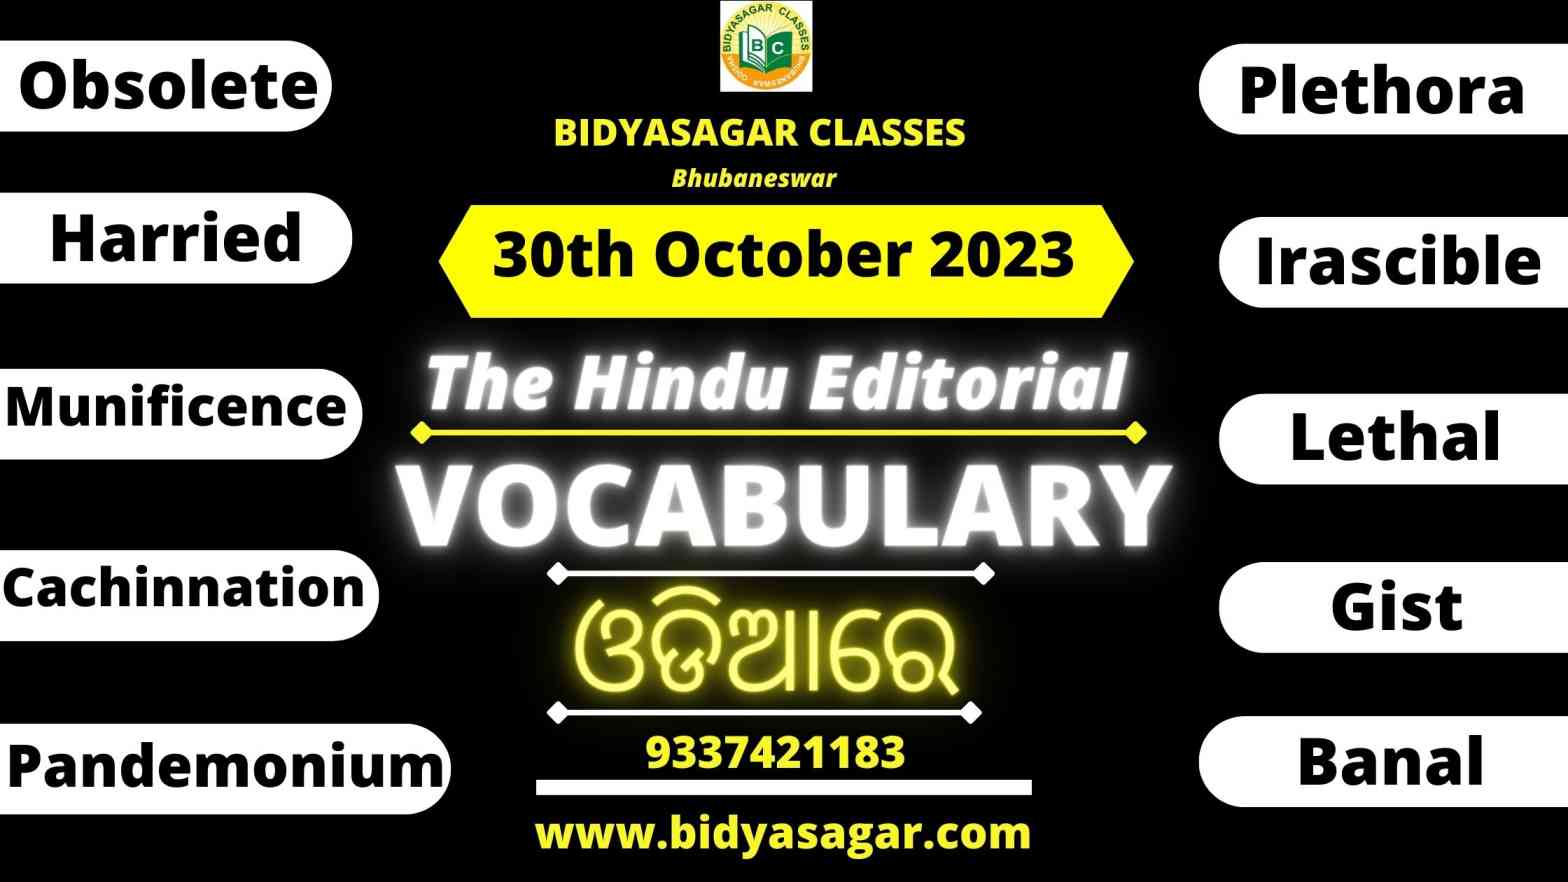 The Hindu Editorial Vocabulary of 30th October 2023